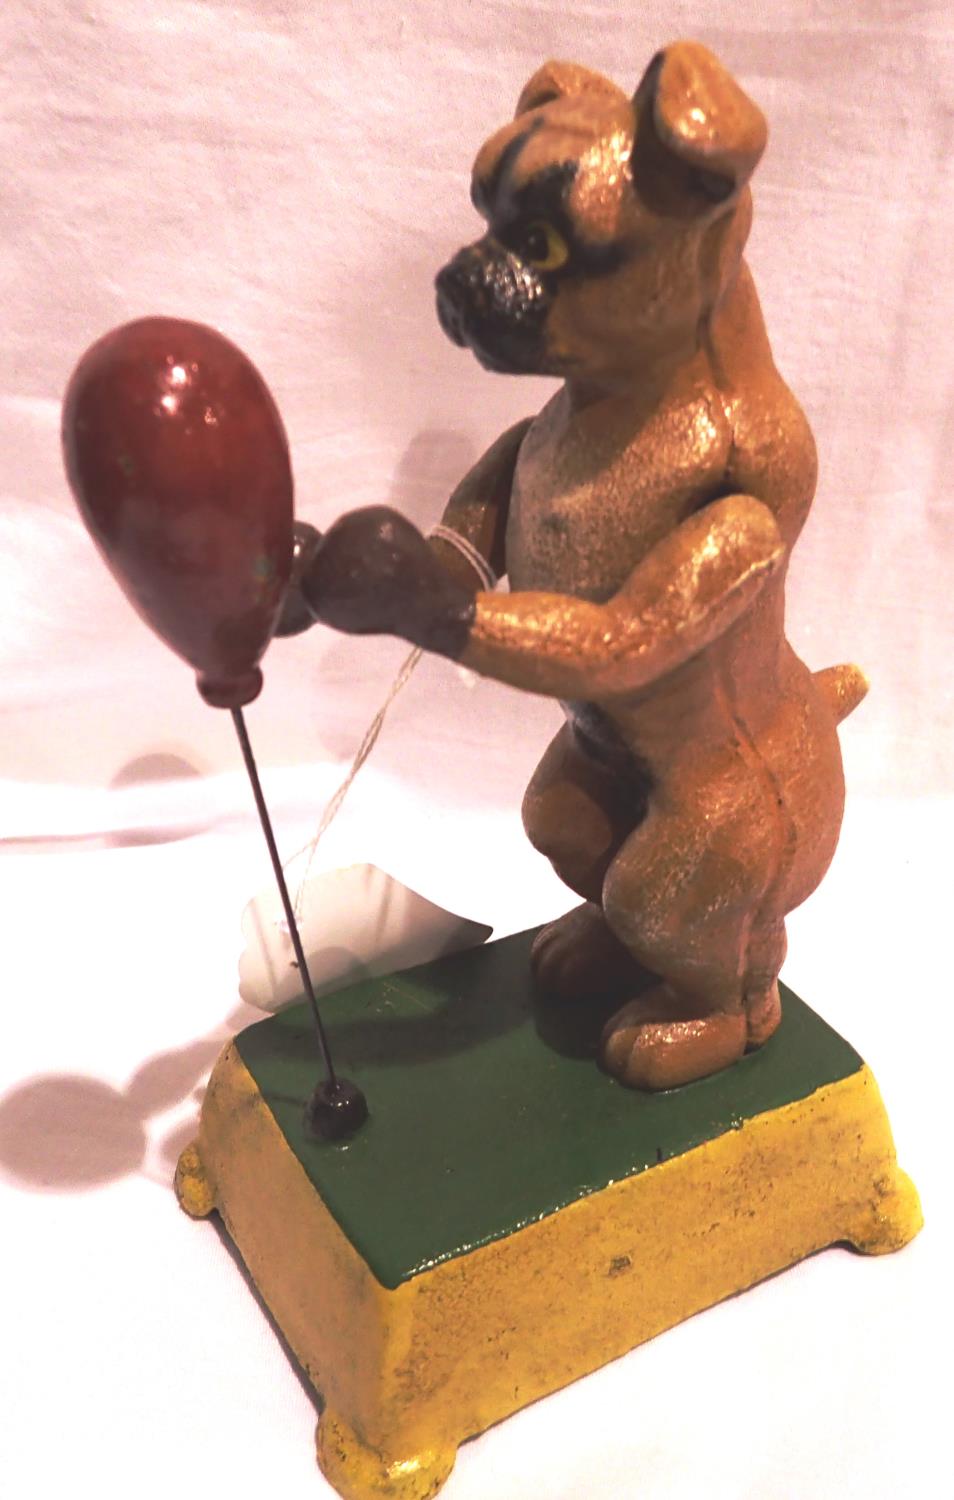 Cast iron automation boxing dog figurine, H: 20 cm. P&P Group 1 (£14+VAT for the first lot and £1+